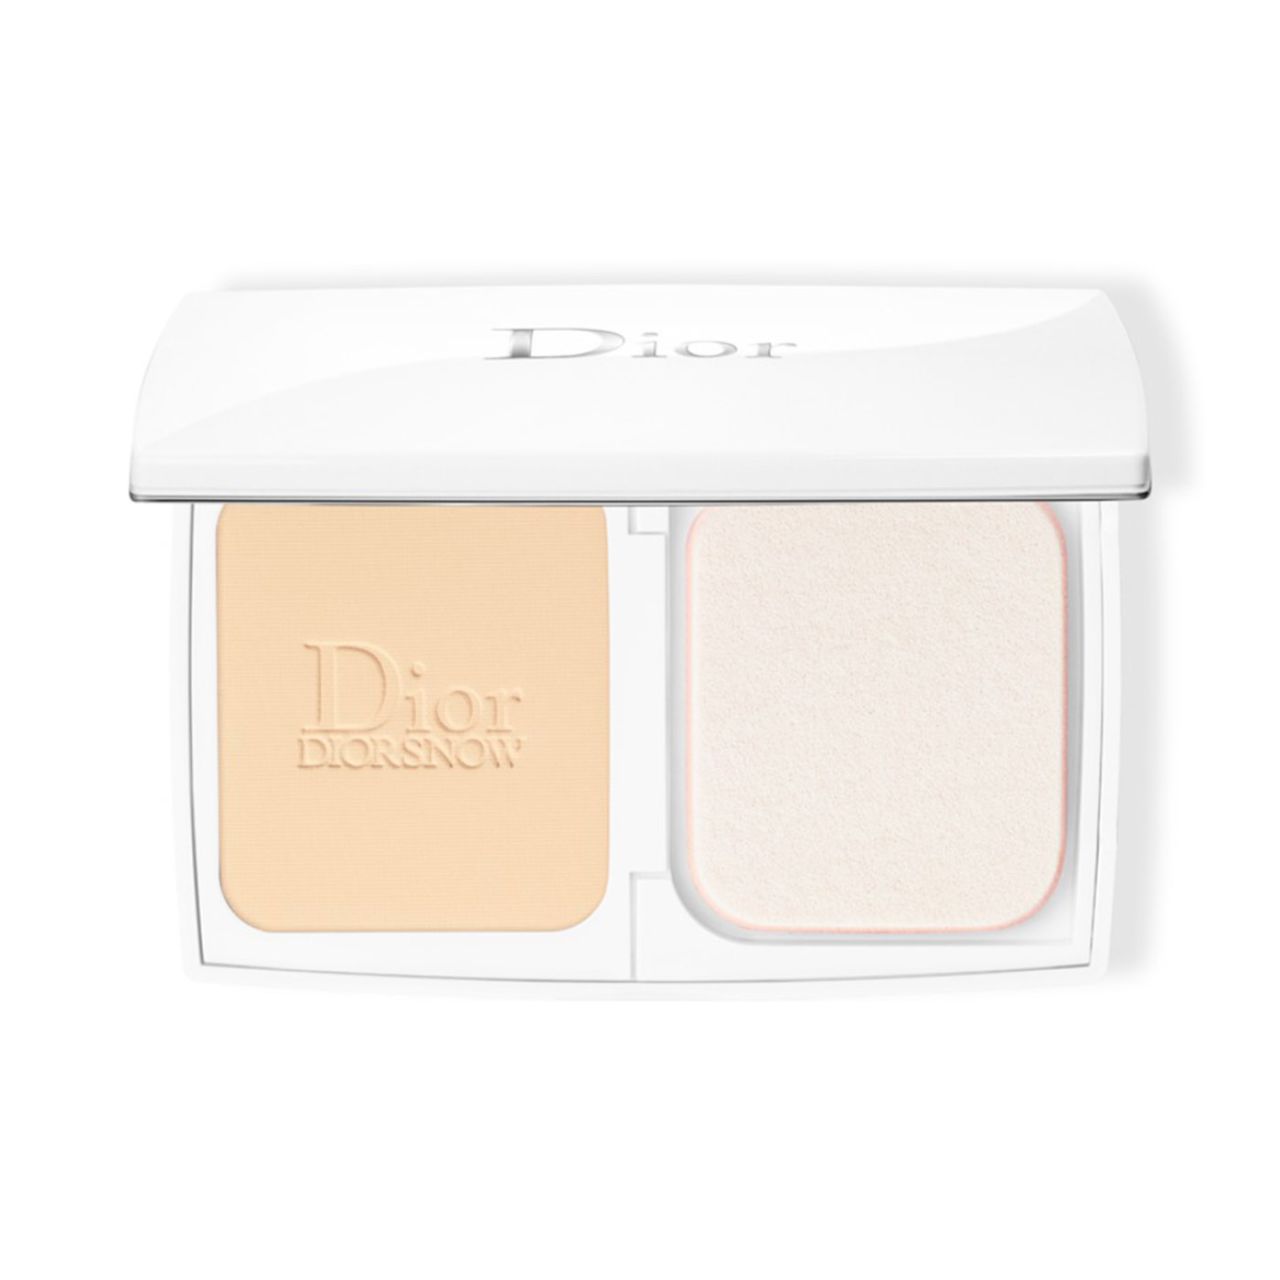 DIORSNOW COMPACT LUMINOUS PERFECTION BRIGHTENING FOUNDATION SPF 20 - PA